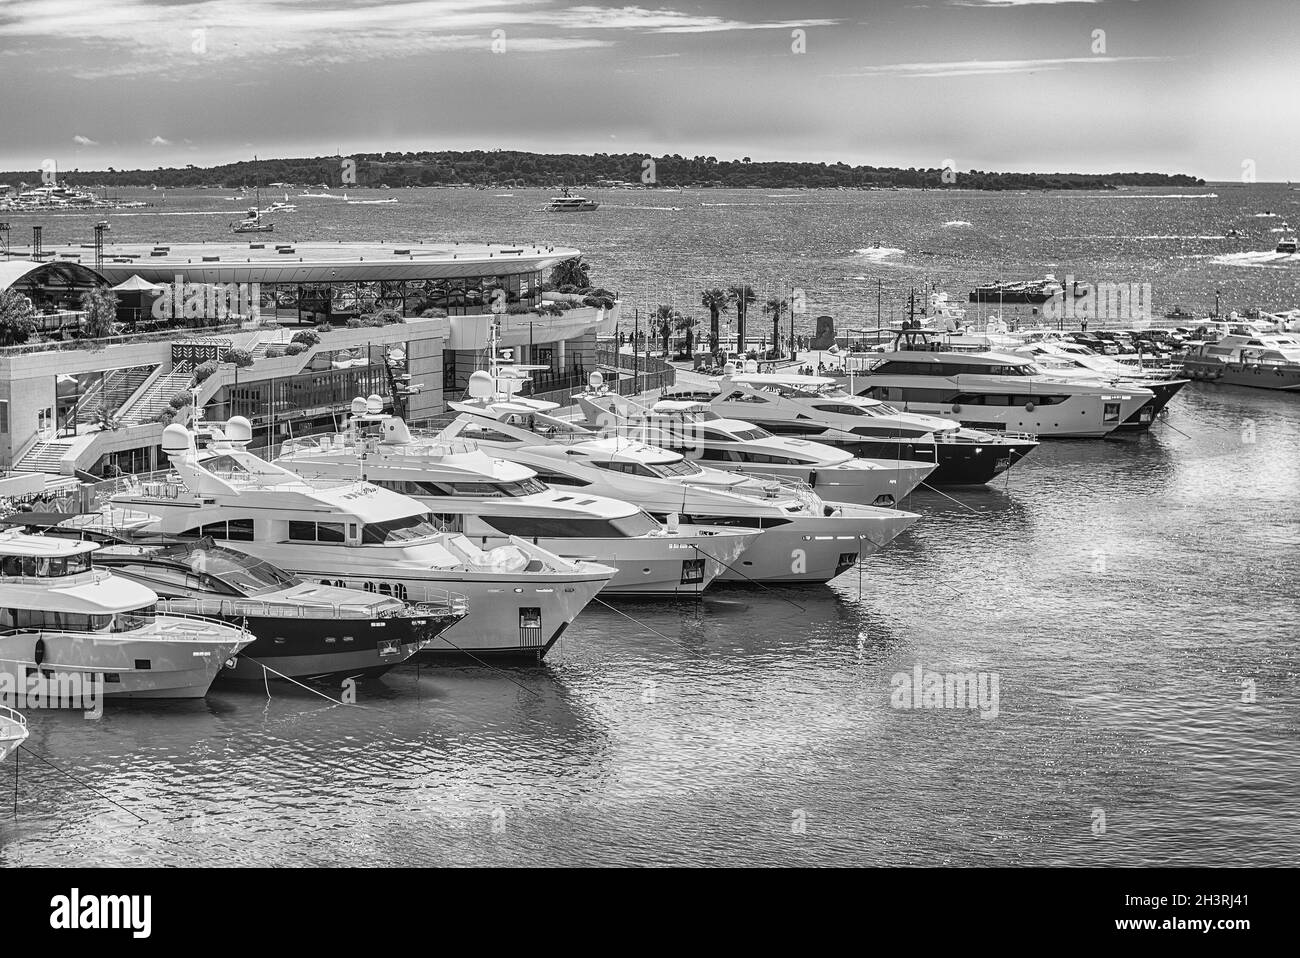 View over luxury yachts of Vieux Port in Le Suquet district, city centre and old harbour of Cannes, Cote d'Azur, France Stock Photo